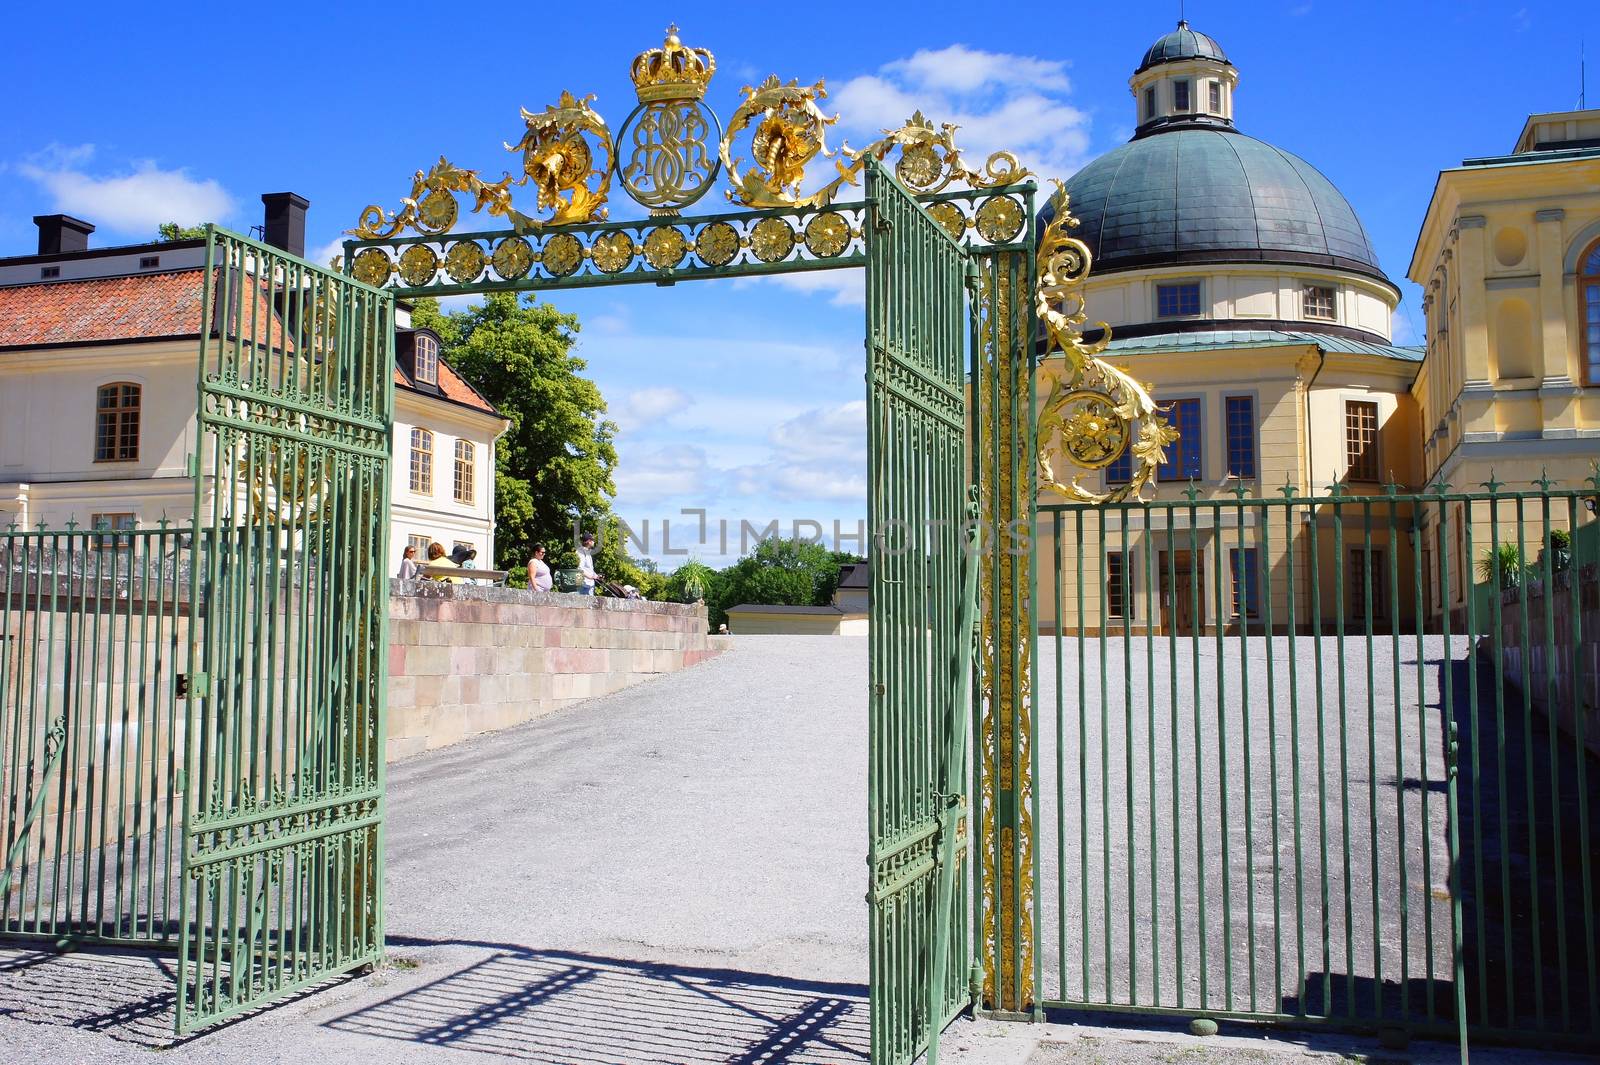 Drottningholm Palace, originally built in the 16th century, one of Sweden's most popular tourist attractions